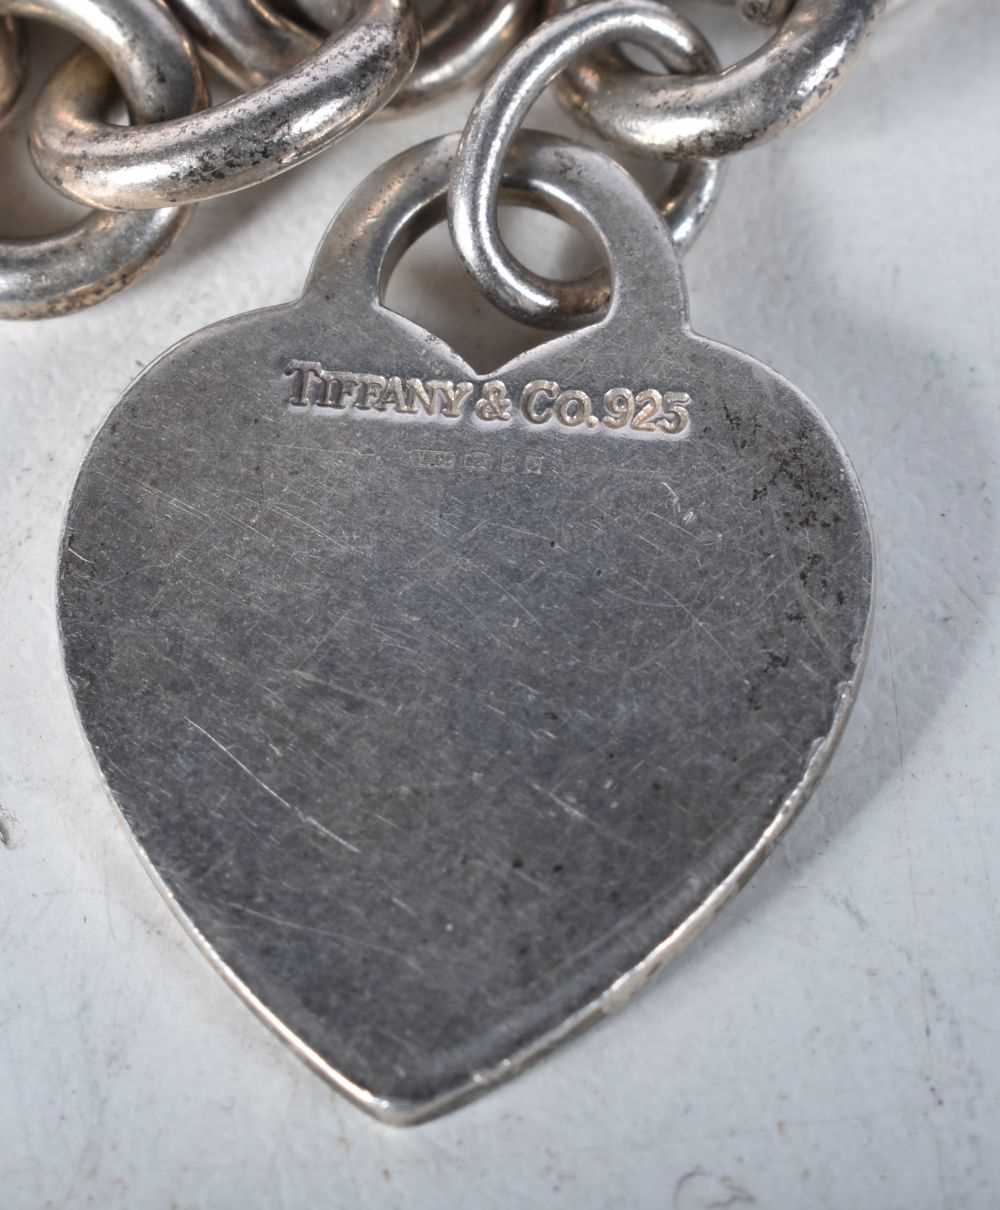 Silver bracelet with heart tag by designer Tiffany & Co. Stamped Tiffany 925. 19cm long, weight 35g - Image 2 of 3